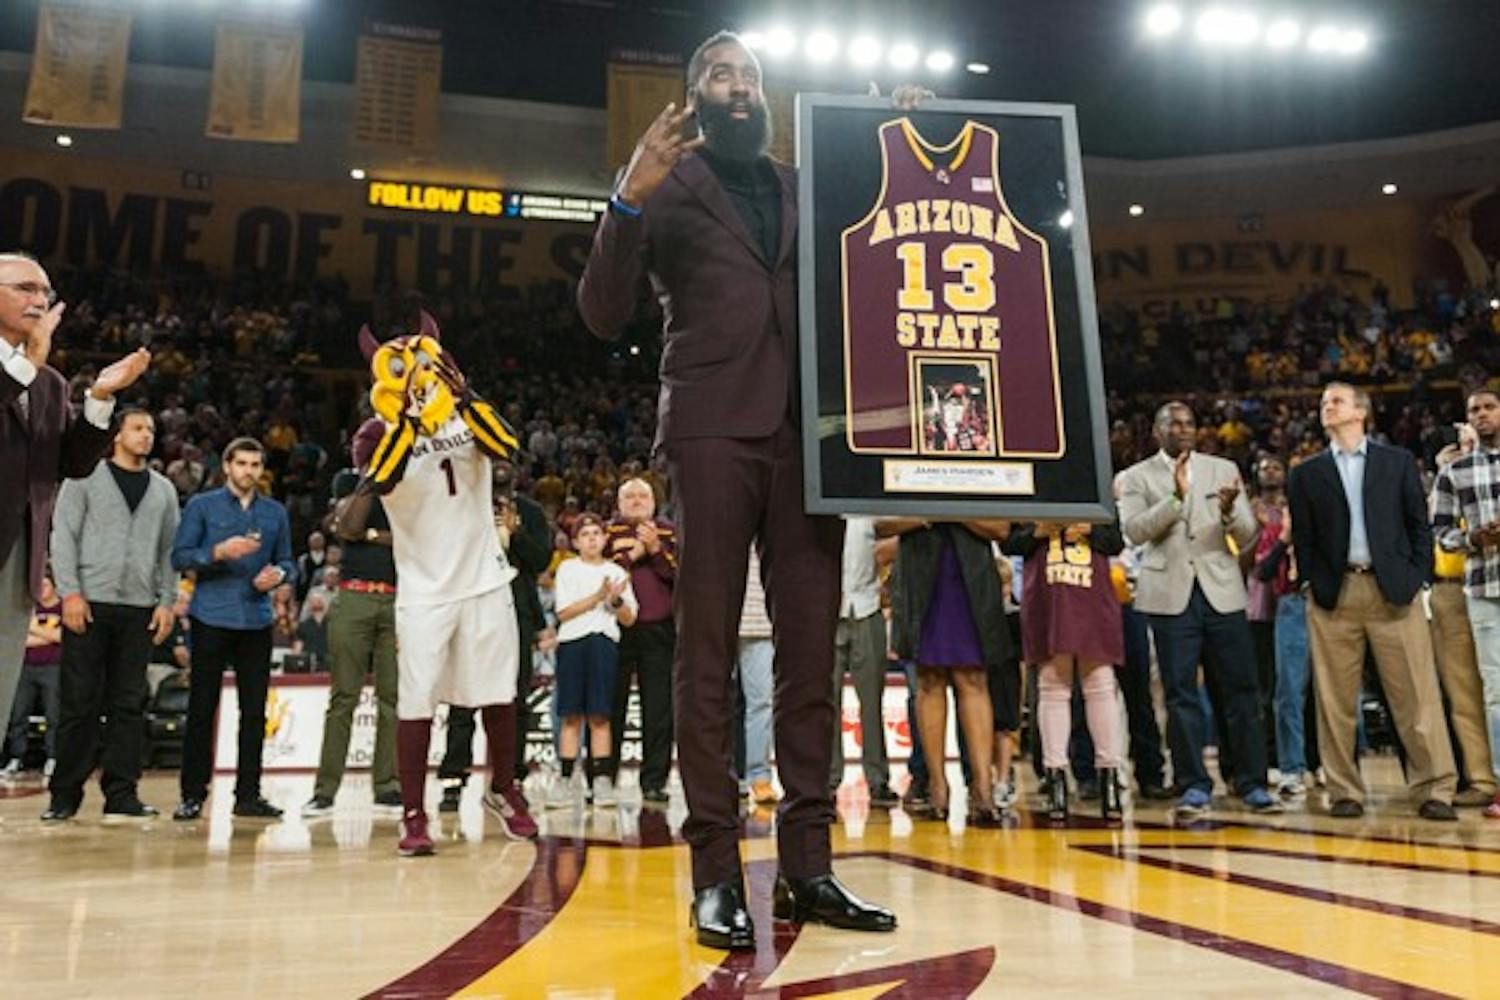 Houston Rockets shooting guard James Harden displays an award on Wednesday, Feb. 18, 2015, at Wells Fargo Arena in Tempe. Harden, a former ASU basketball standout, was honored at halftime for his achievements both with the Sun Devils and in the NBA. (Ben Moffat/The State Press)